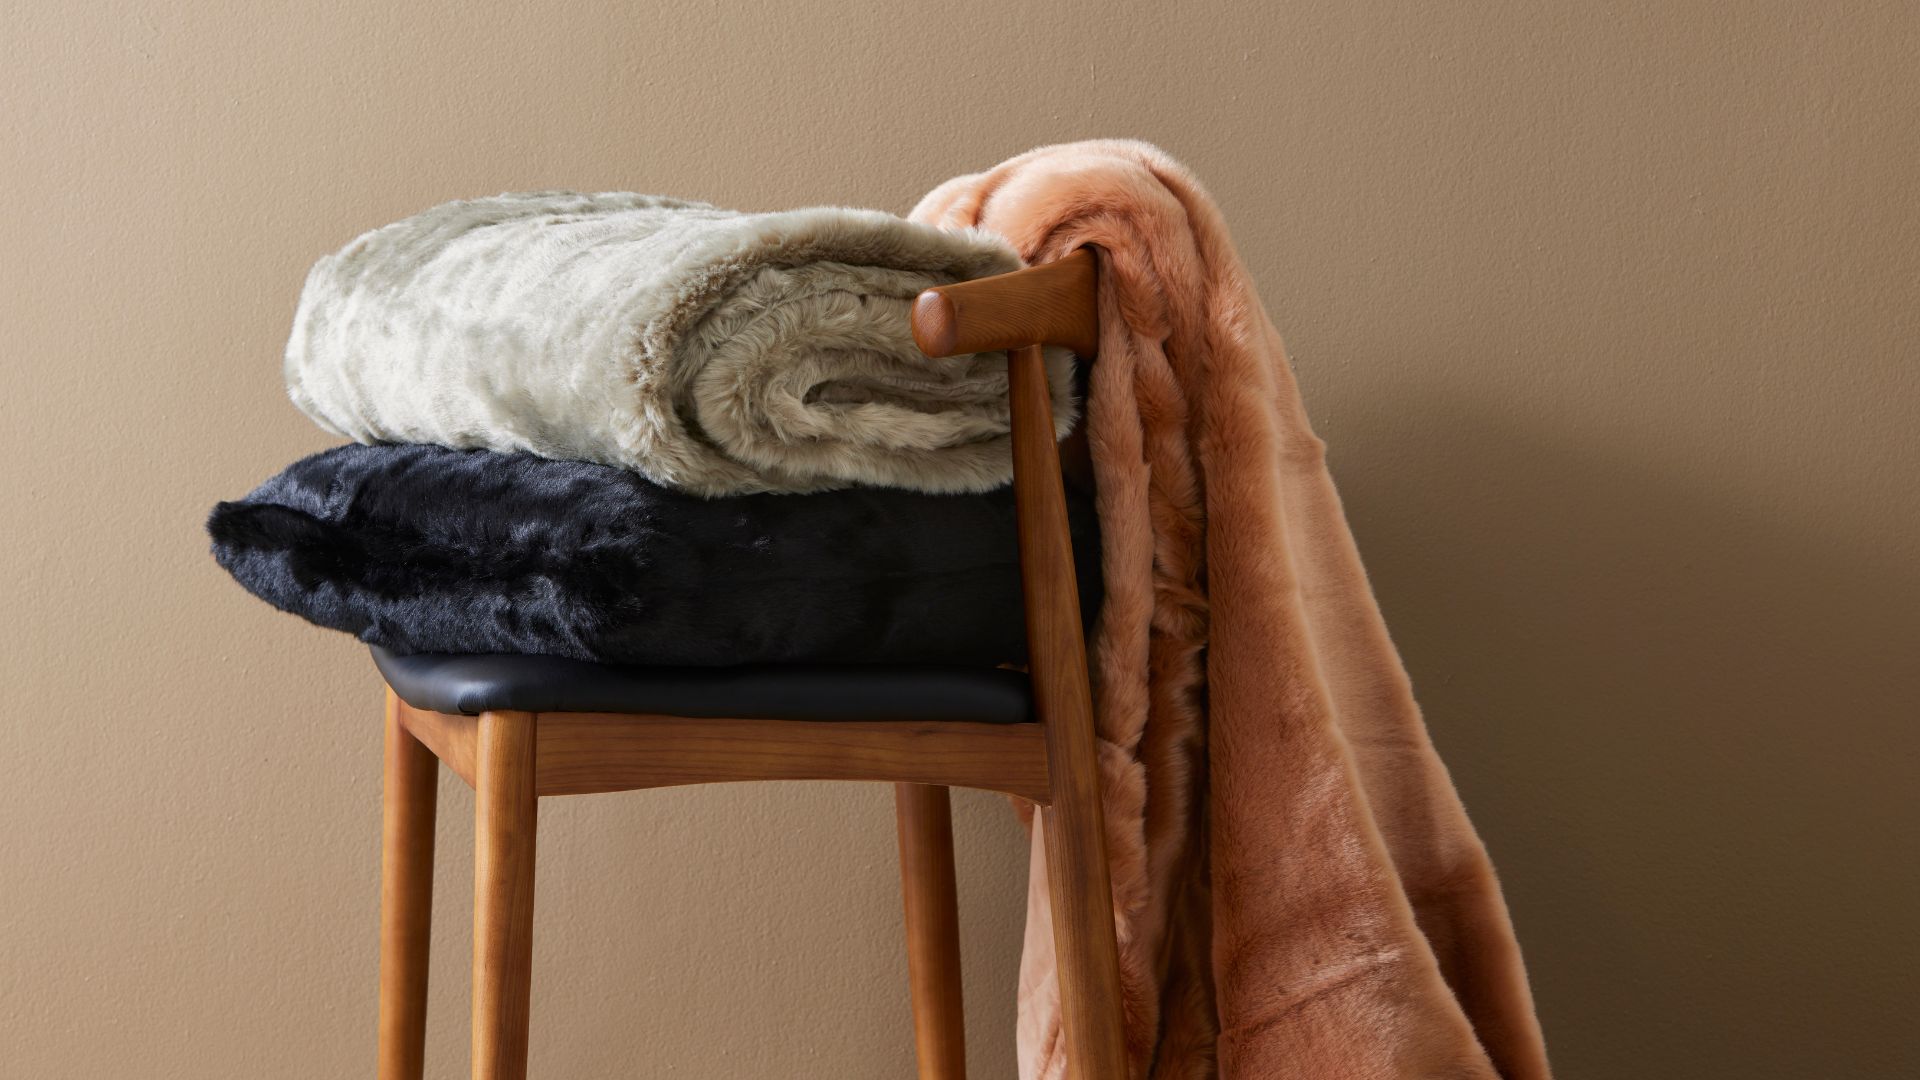 How to care for a weighted blanket